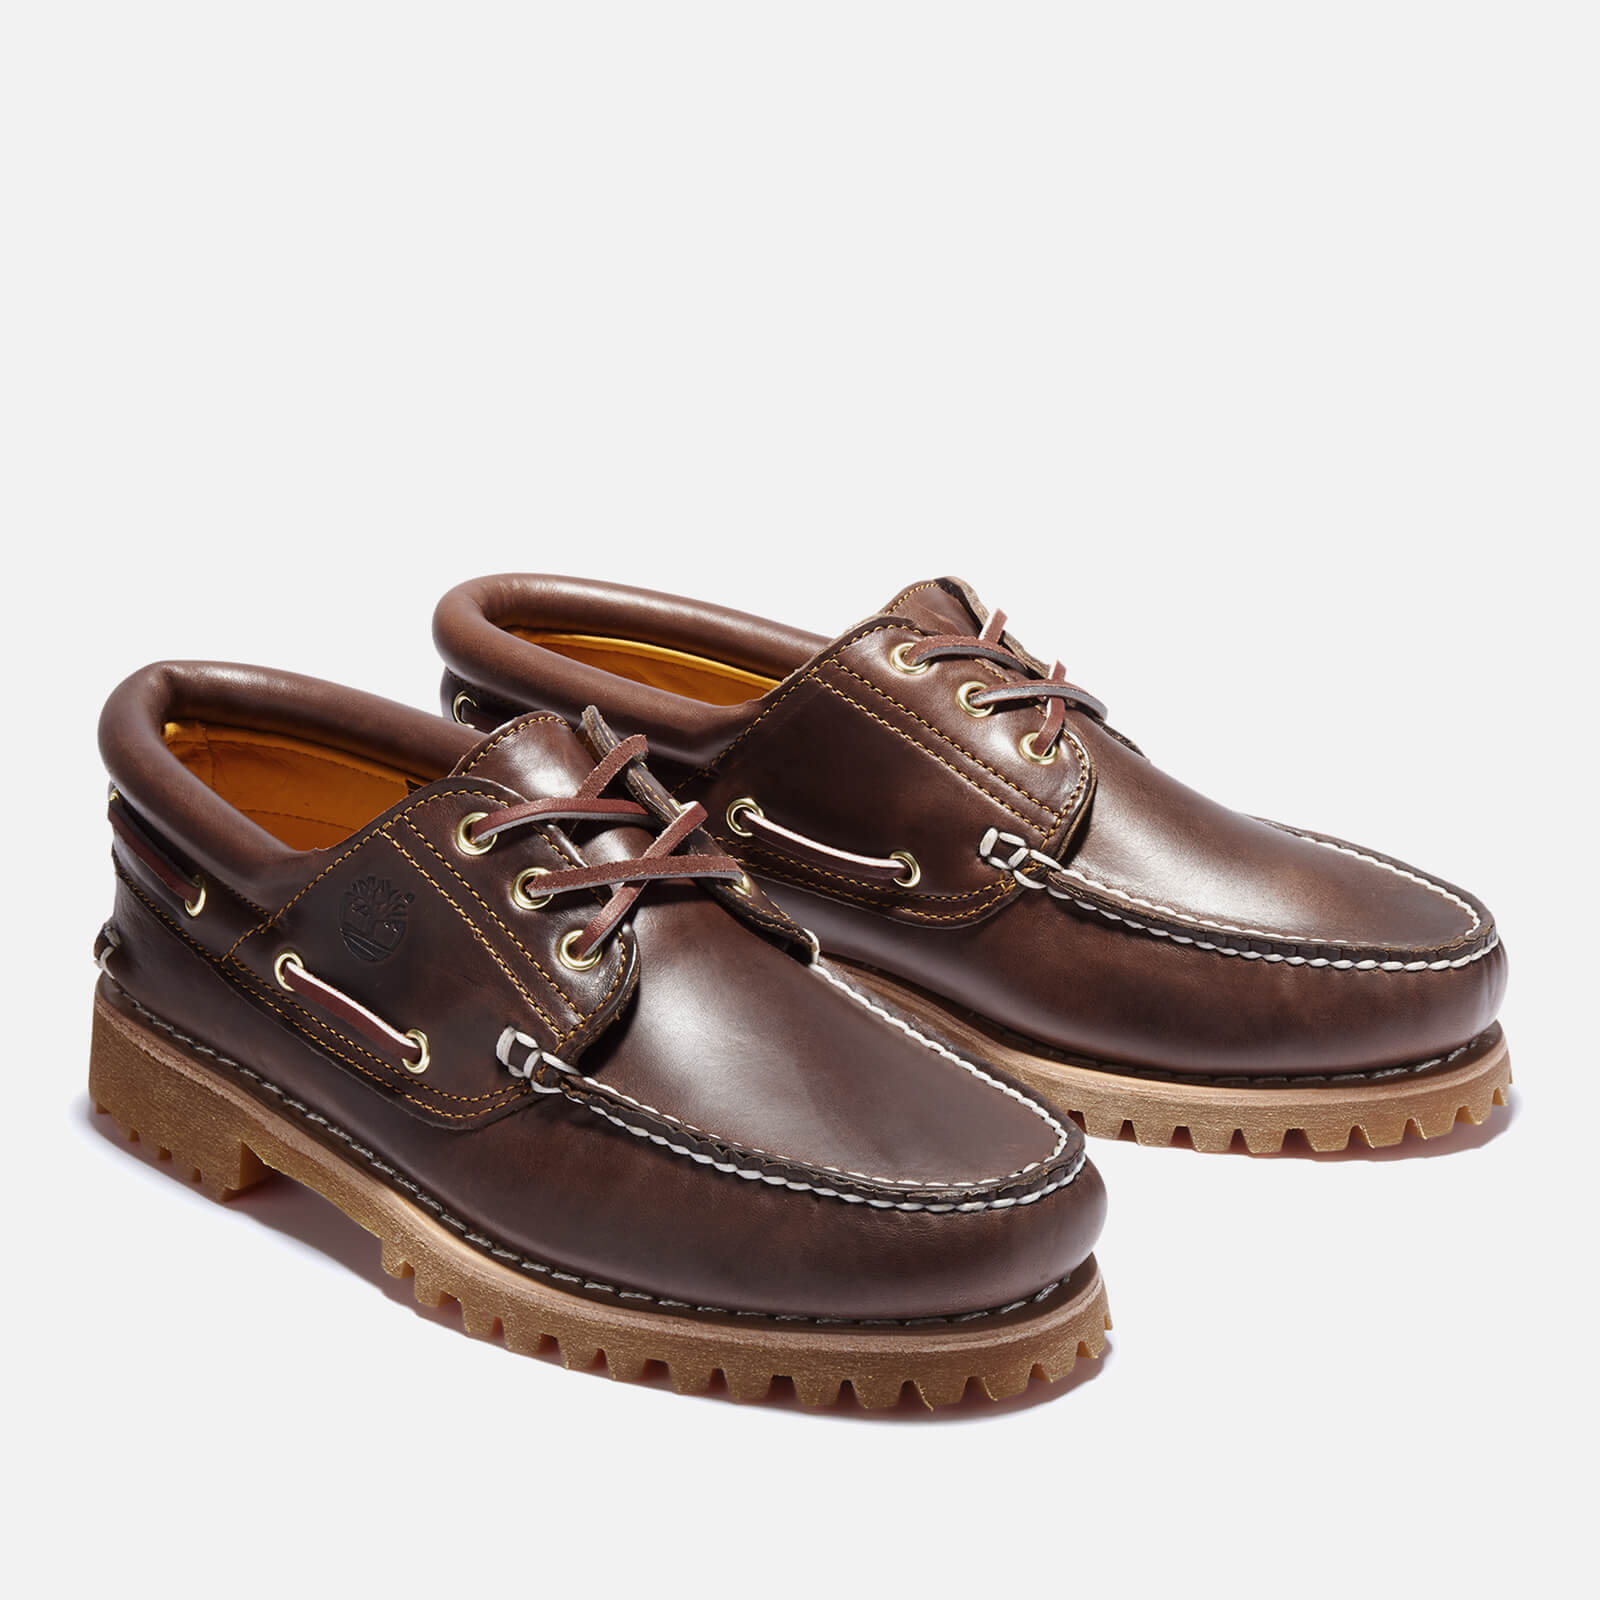 Timberland Men's Authentic Leather Boat Shoes - UK 7 von Timberland